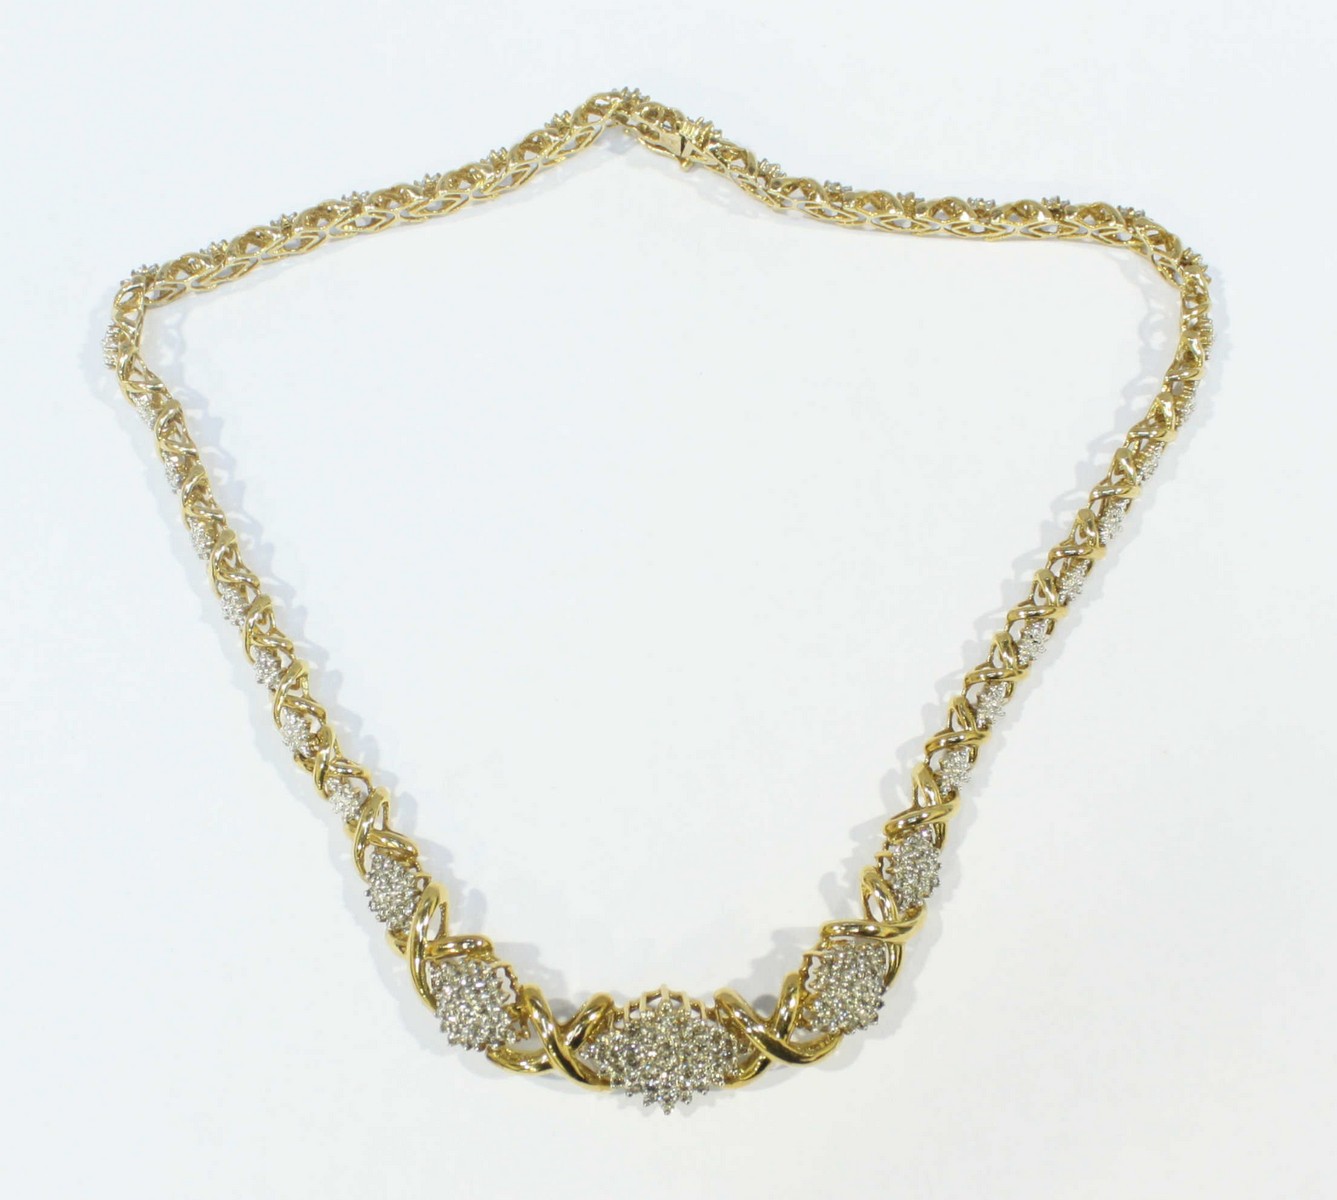 A 9ct yellow gold and diamond necklace with alternating, graduated 'X' shape links and symmetrical